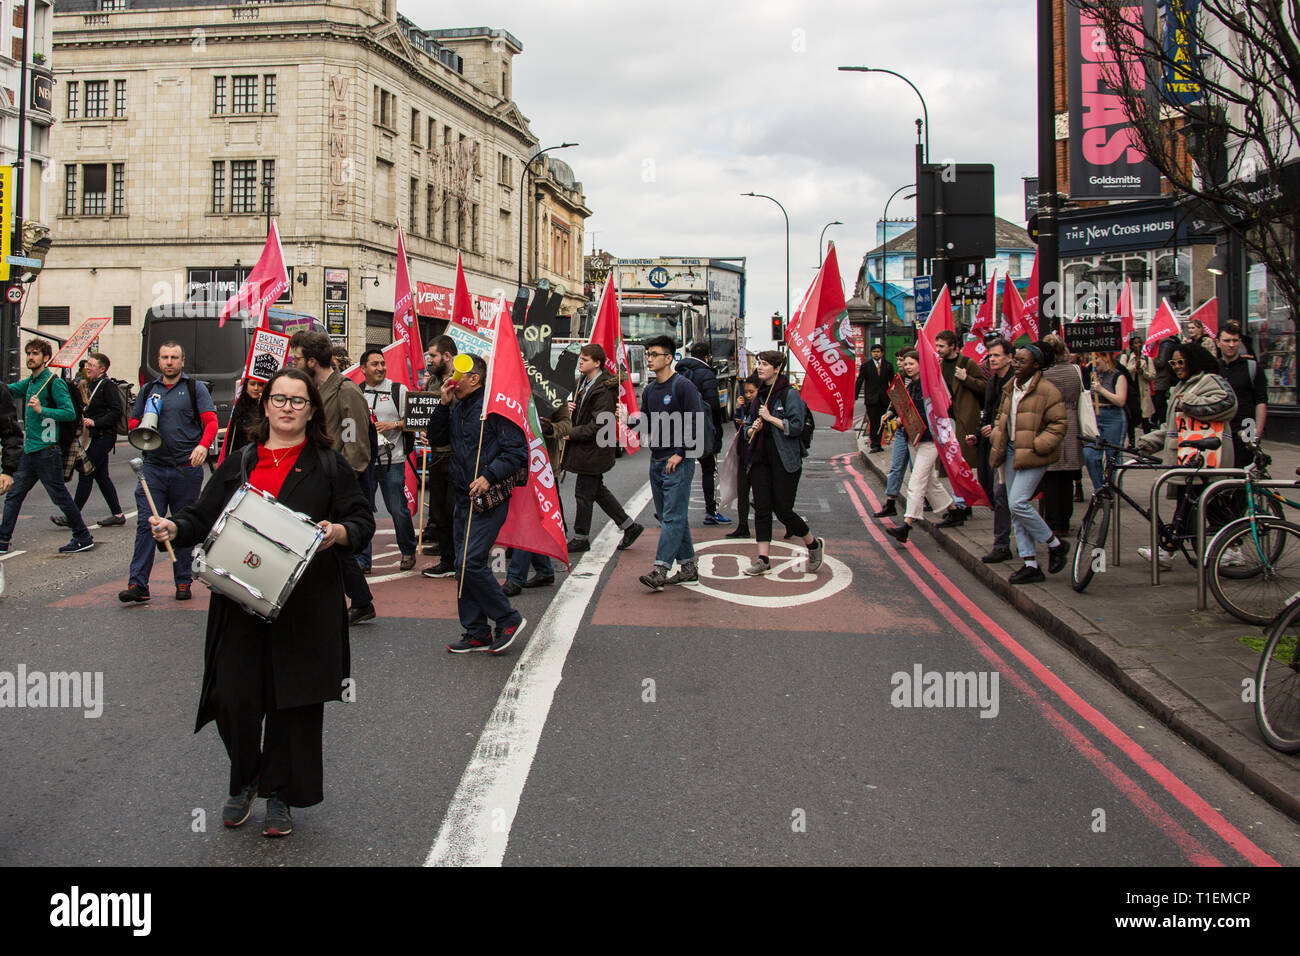 London, UK. 26 March, 2019. Security Officers and supporters at Goldsmiths College in South London marched through the campus where they addresses students in canteens and lecture theatres before taking to the streets to continue the campaign for jobs to be brought ‘in house' so that terms and conditions match those of staff directly employed by the college. David Rowe / Alamy Live News. Stock Photo